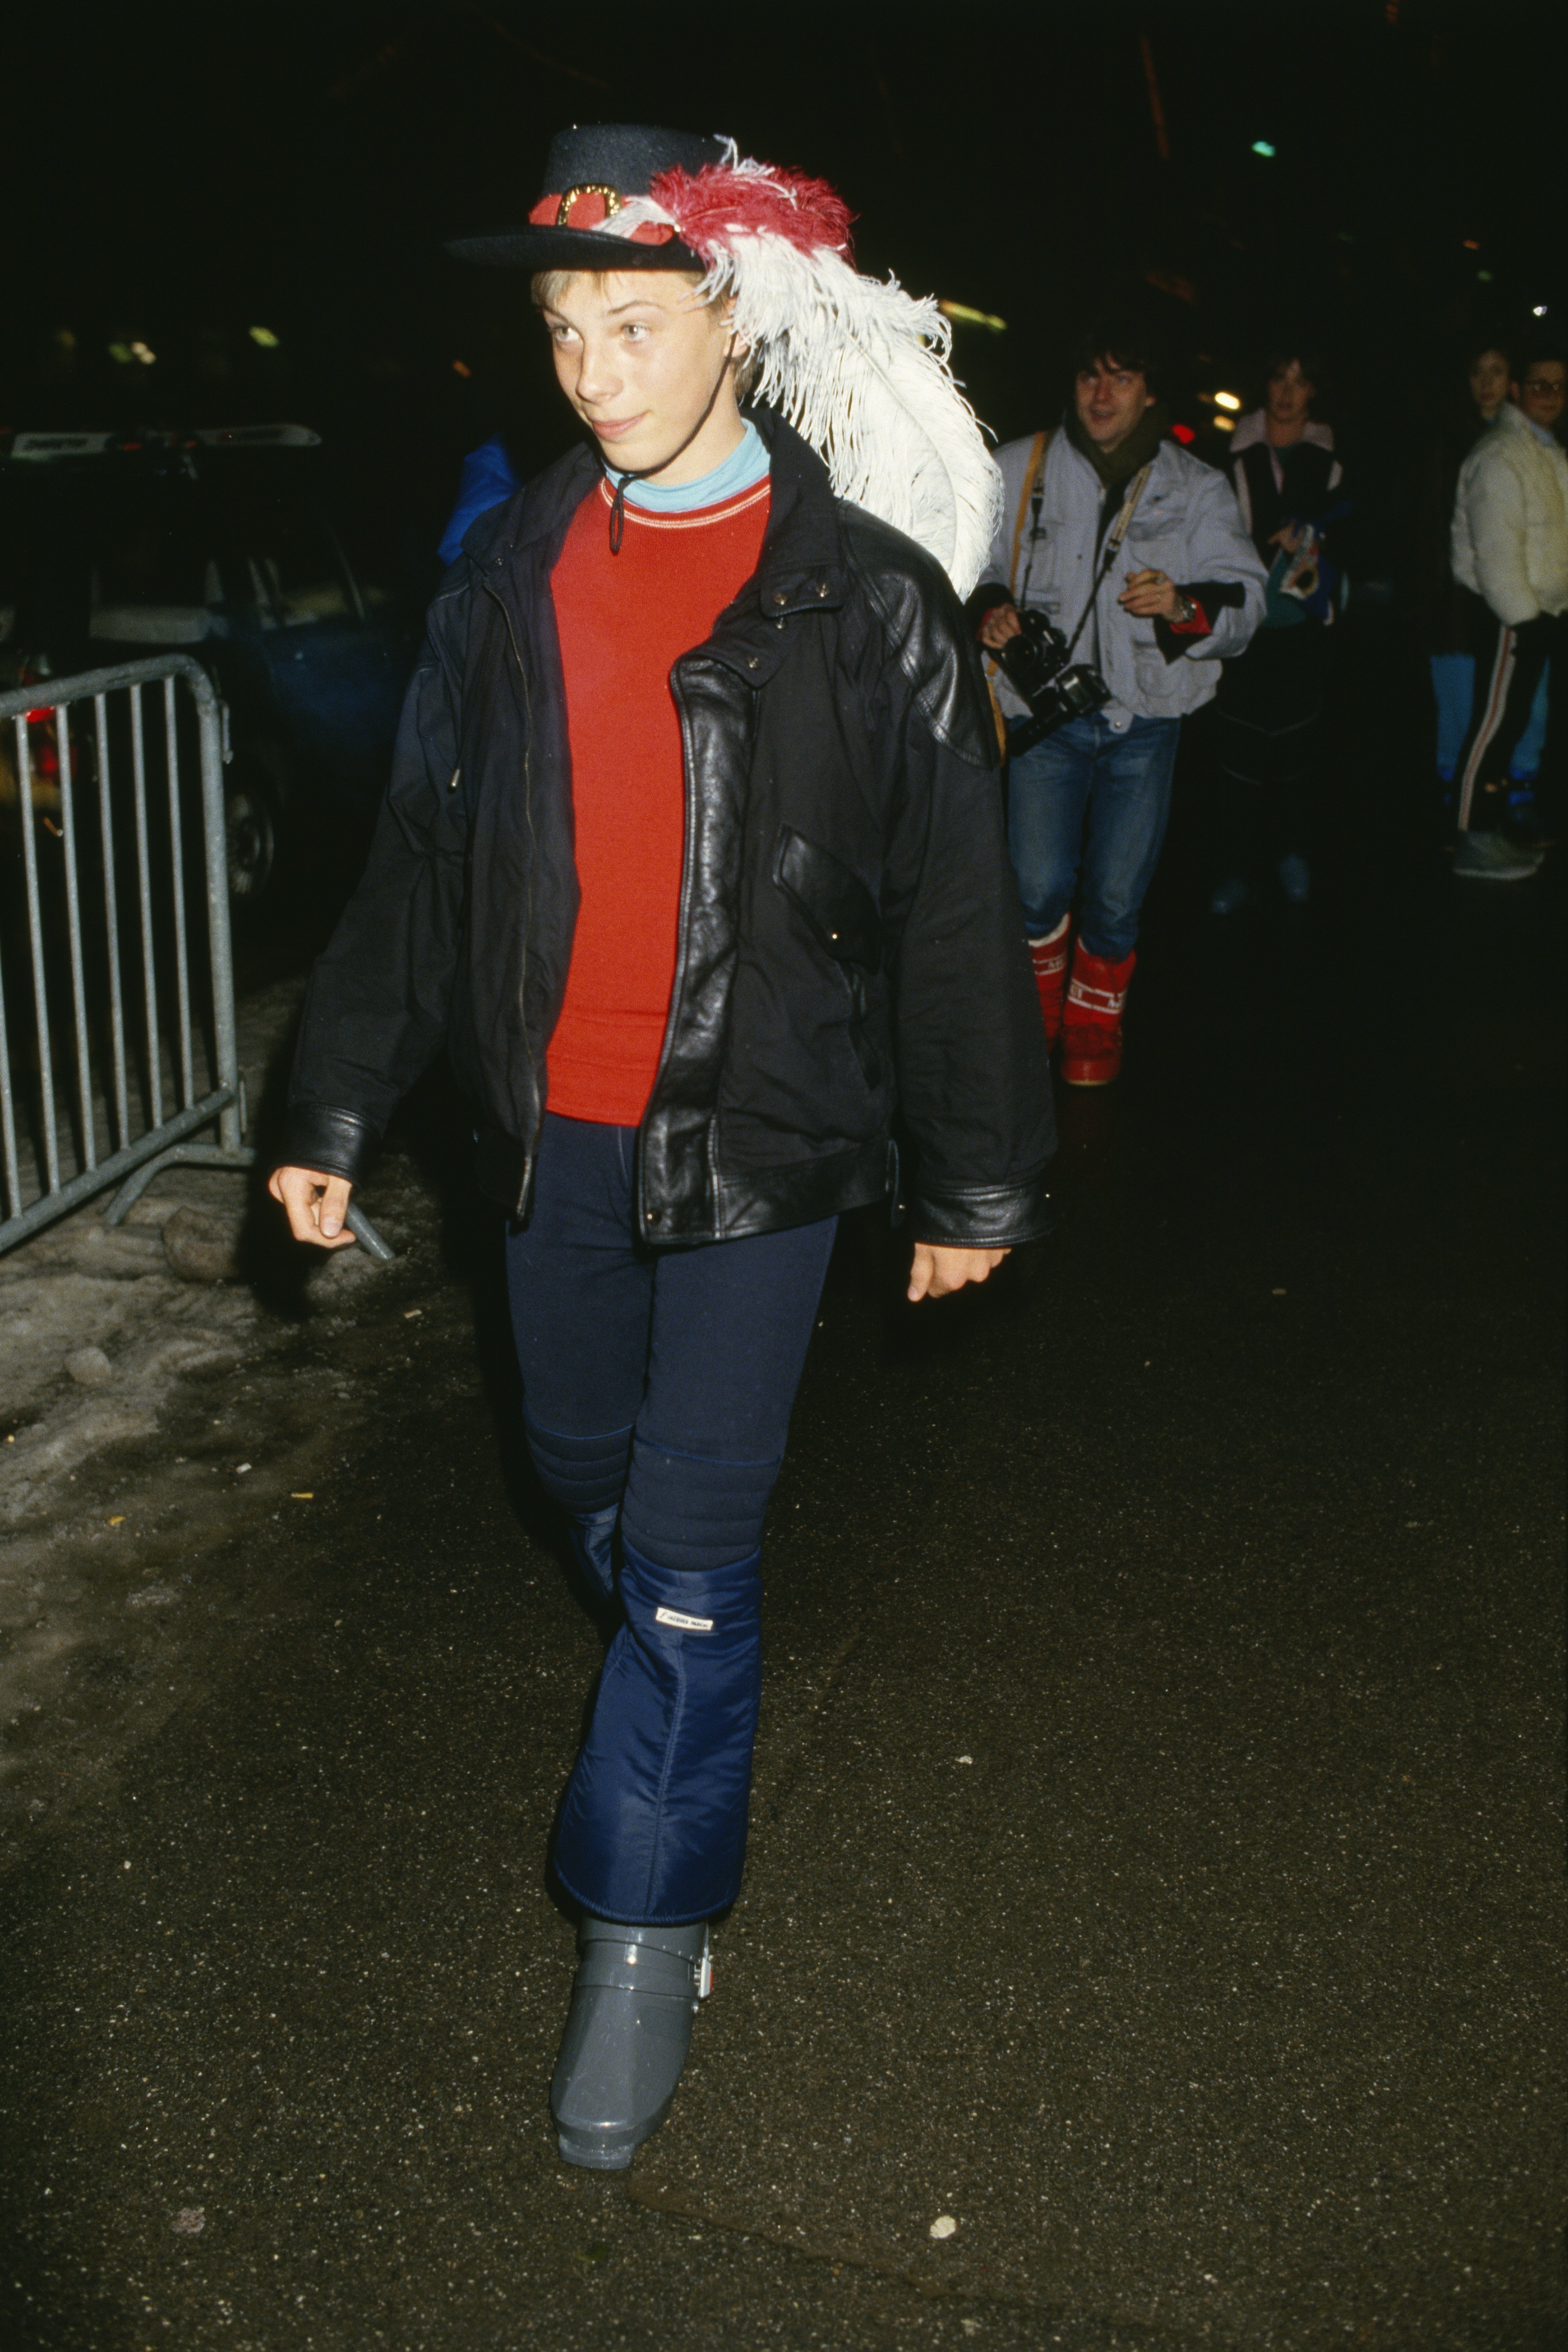 Zowie Bowie (Duncan Jones) aged 14, the son of David Bowie and Mary Angie Bowie, during a winter vacation | Photo: James Andanson/Sygma via Getty Images